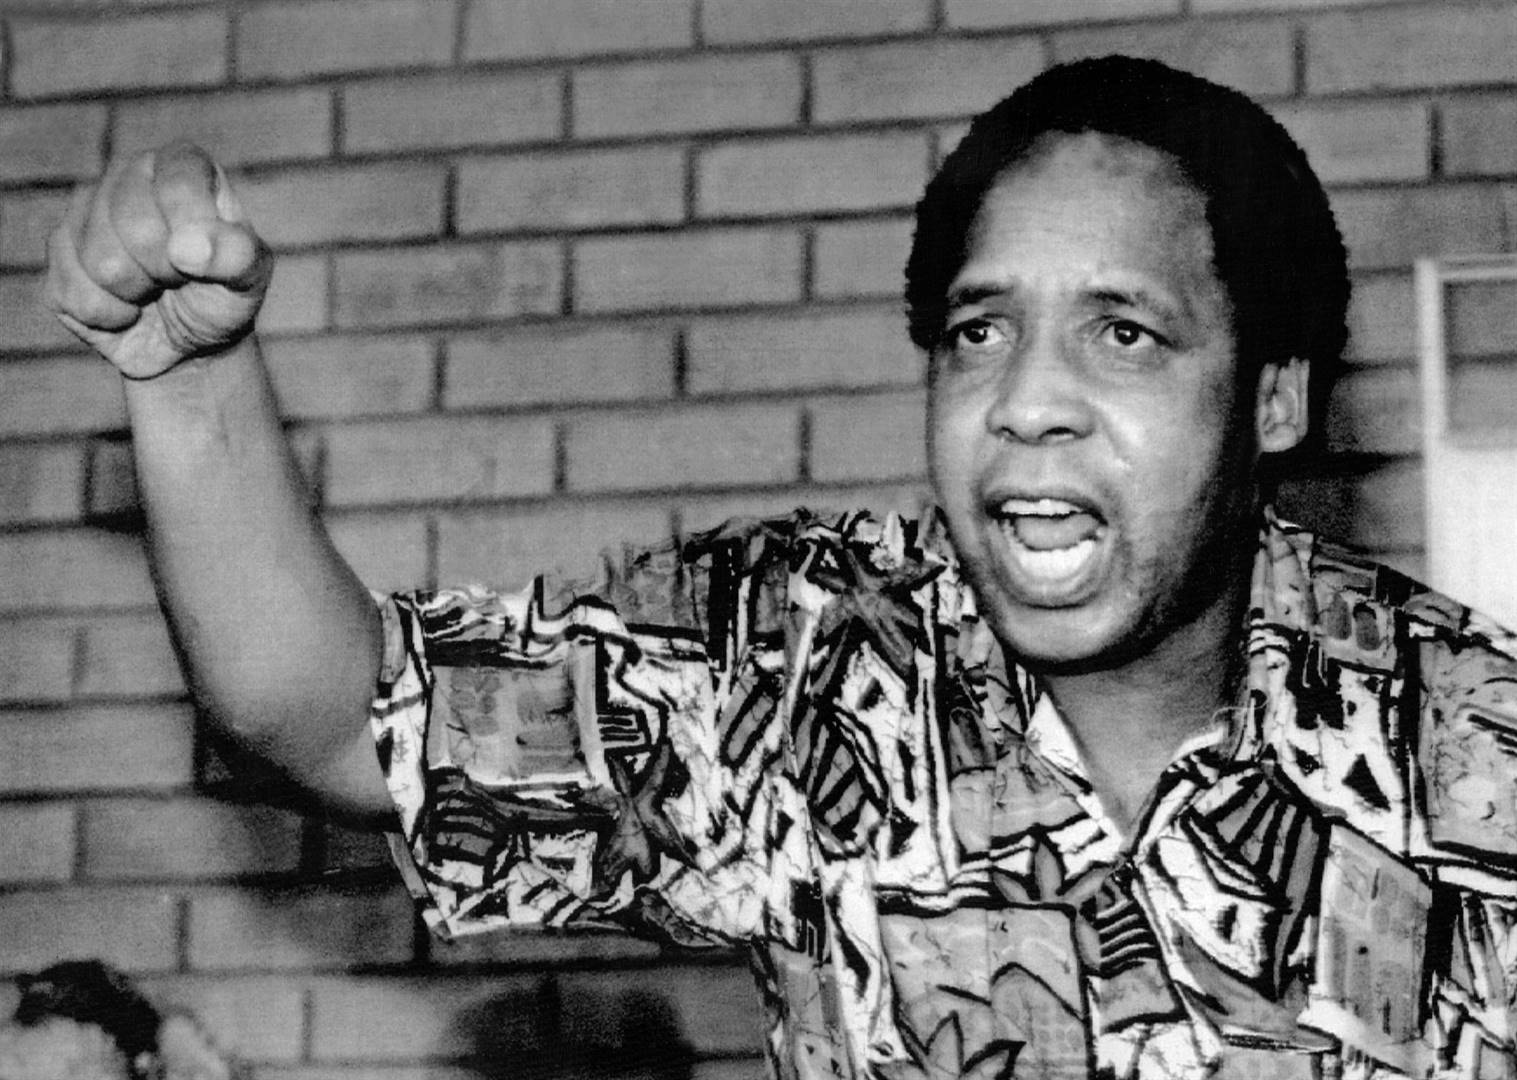 Chris Hani was the leader of the SACP and Umkhonto weSizwe, the ANC’s military wing. He was a fierce opponent of the apartheid government and was assassinated on April 10 1993. Photo: media24/archive